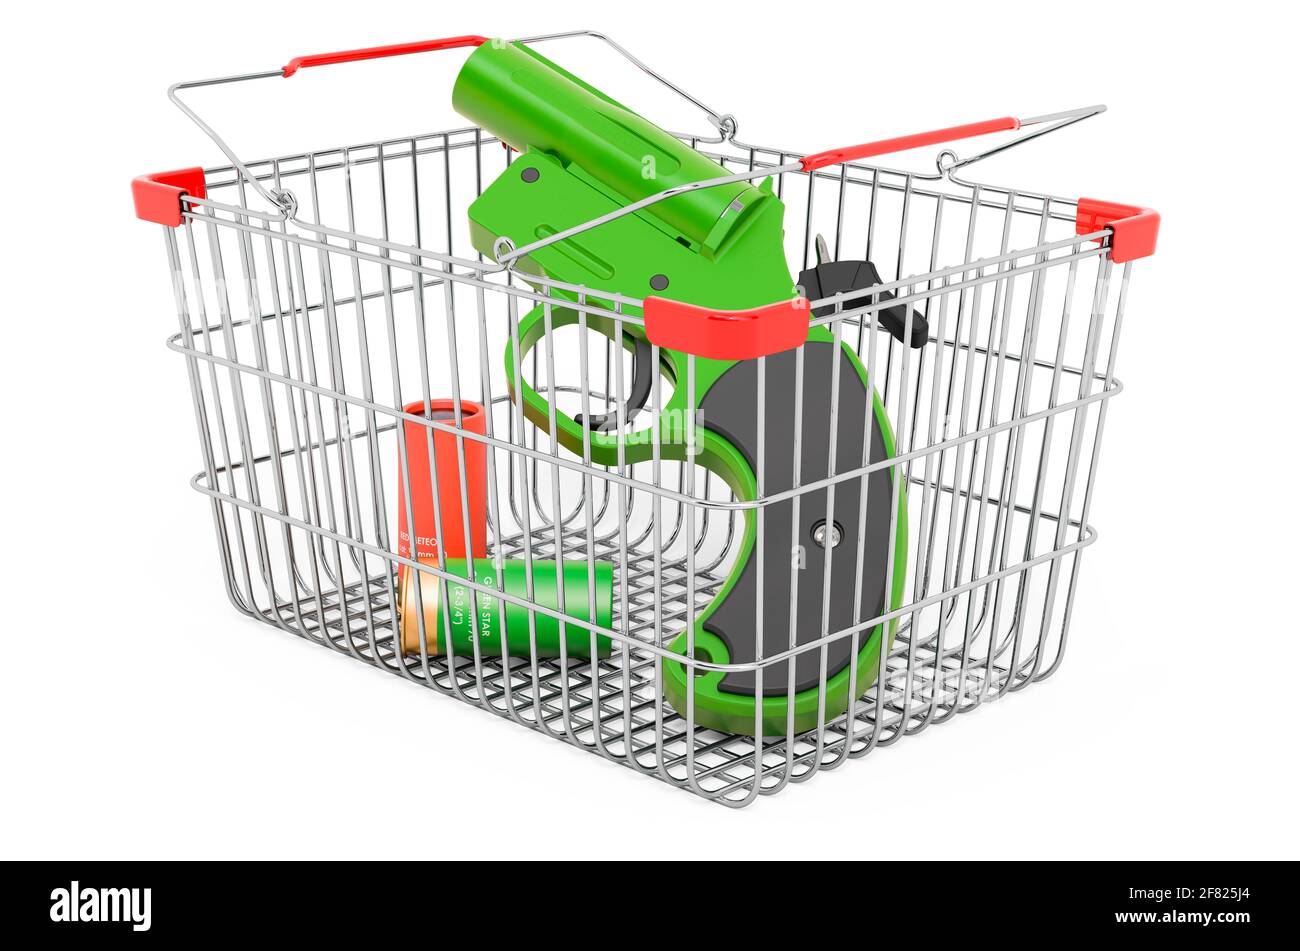 Shopping basket with signal pistol. 3D rendering isolated on white background Stock Photo